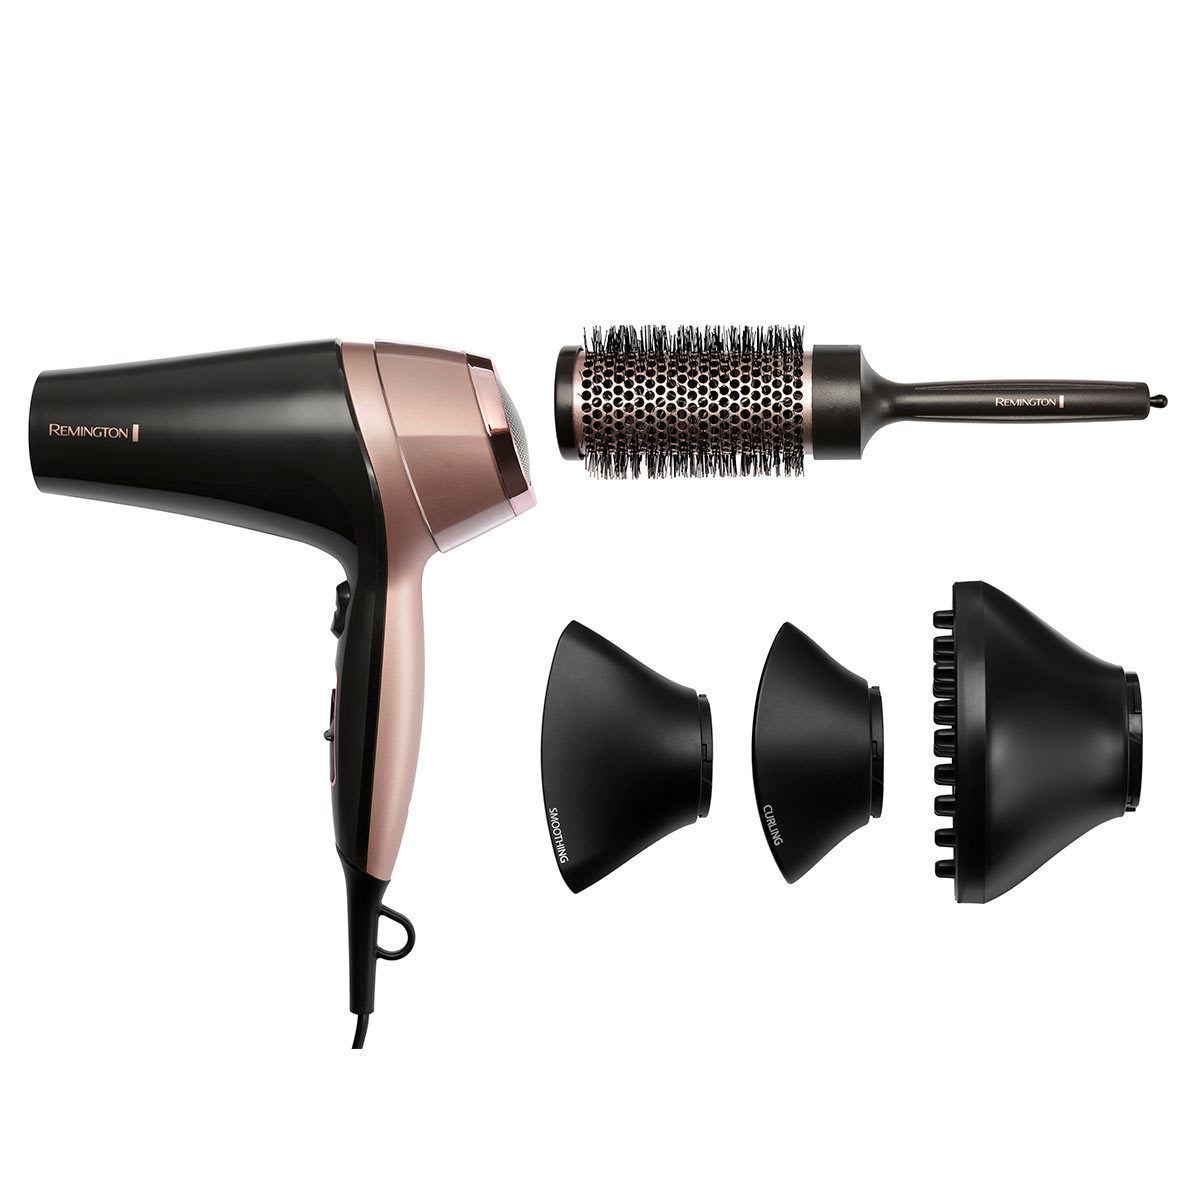 image of hairdryer with attachments included